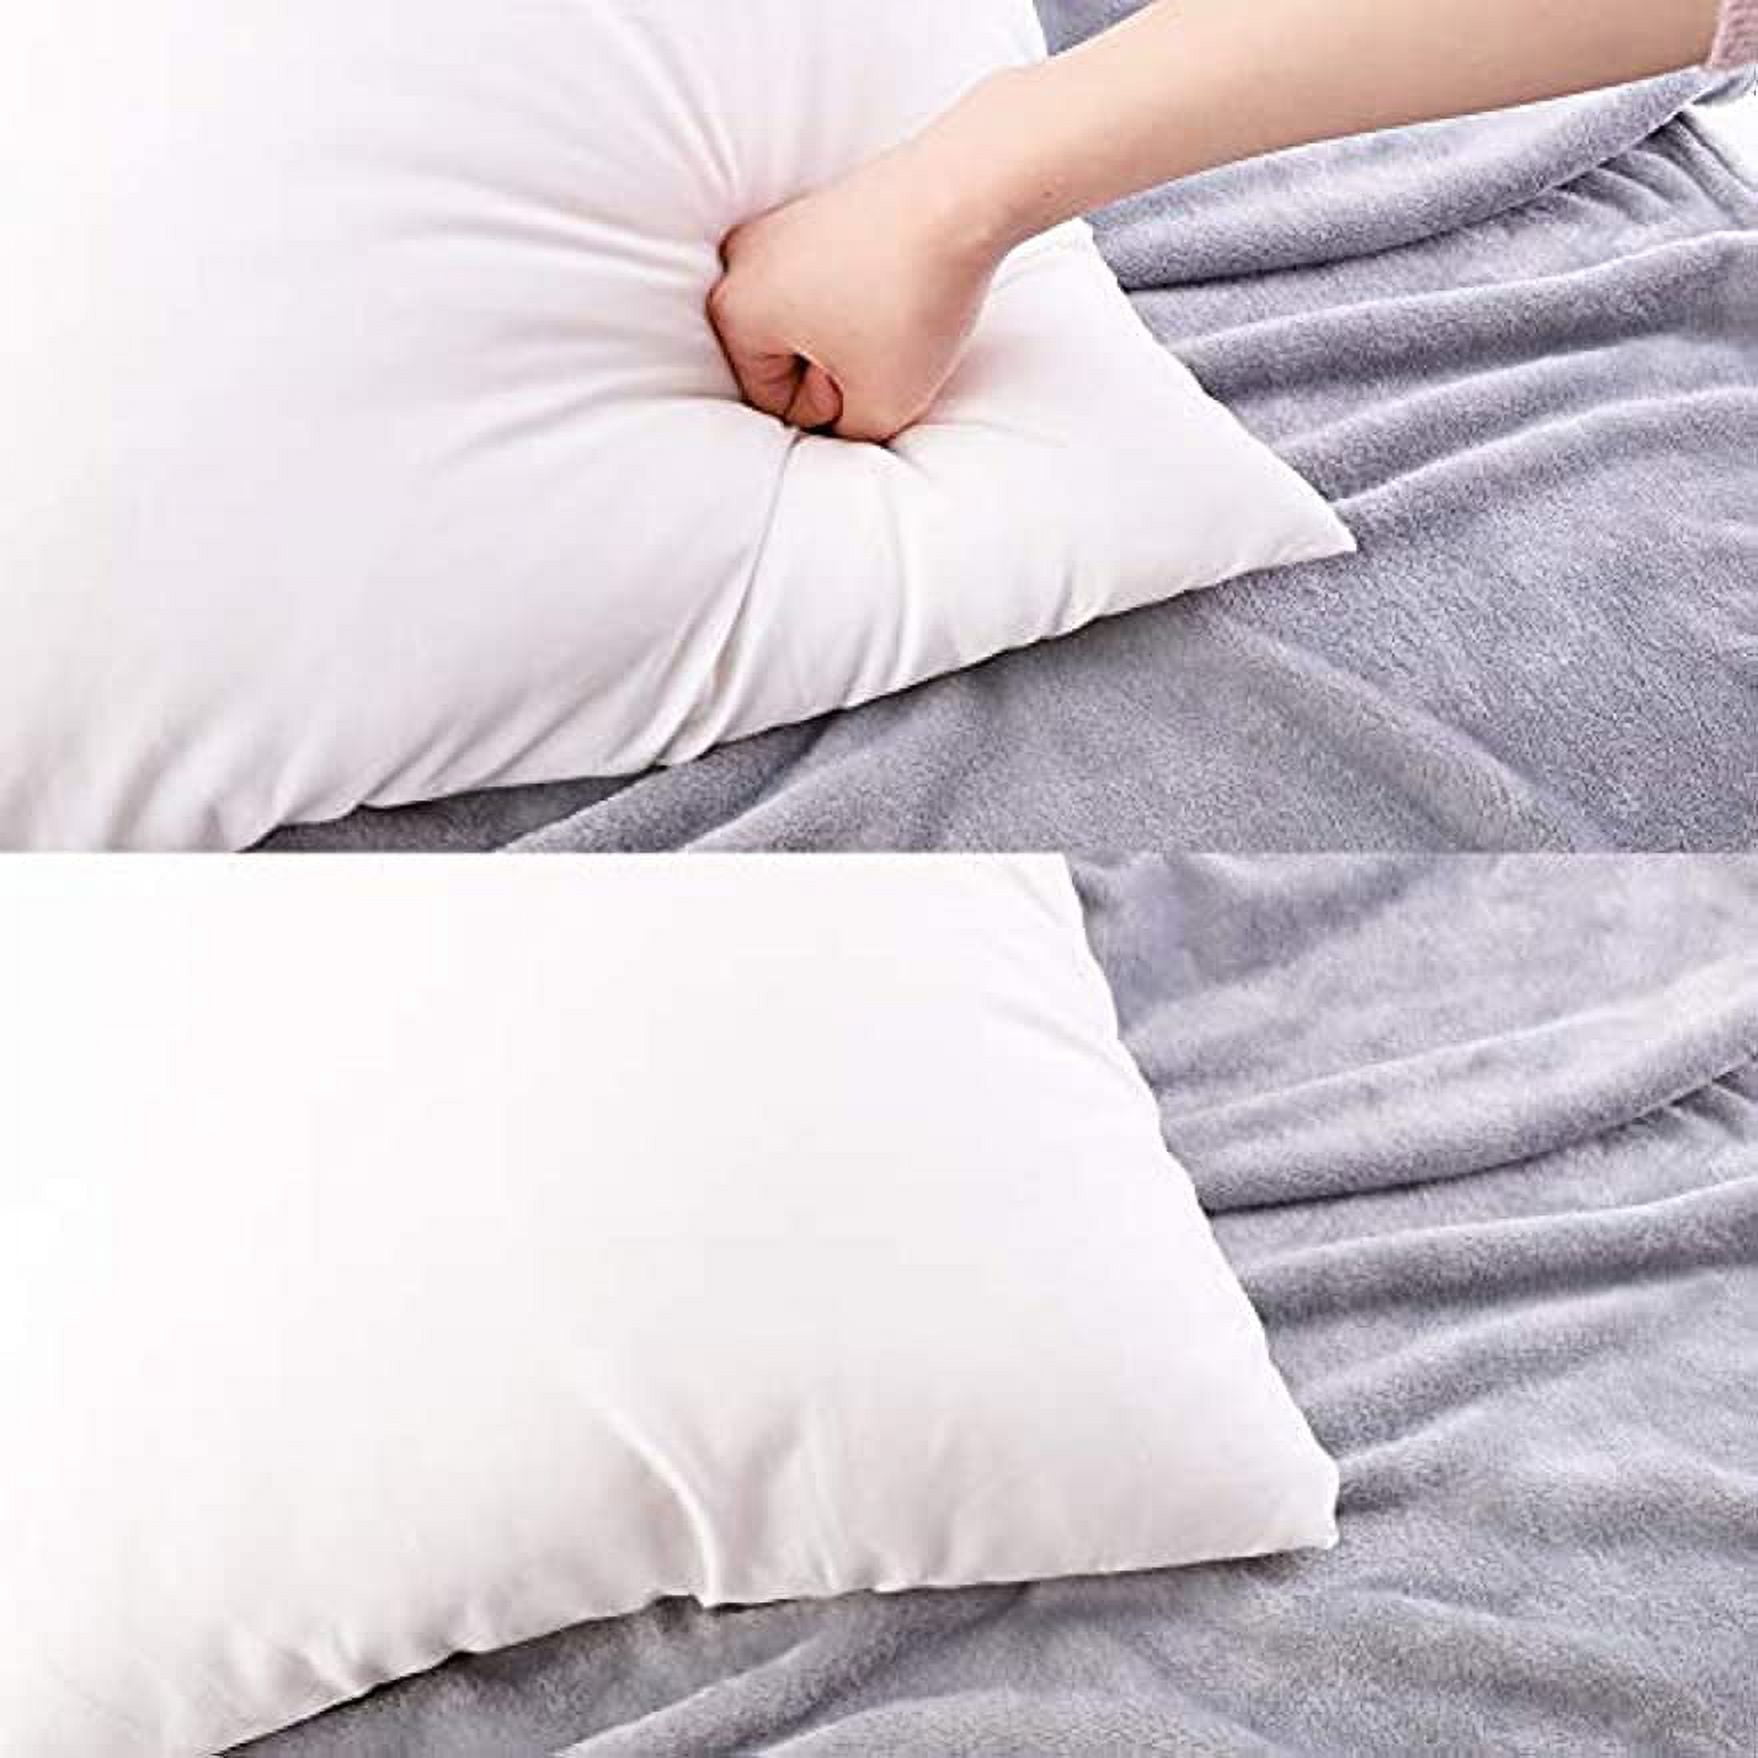 TSUTOMI 18 x 18 Pillow Insert Set of 2 for Pillow Stuffing, Decorative  Pillows for Bed, 18x18 Pillow Fillers and Down Lumbar Pillow Insert, Square